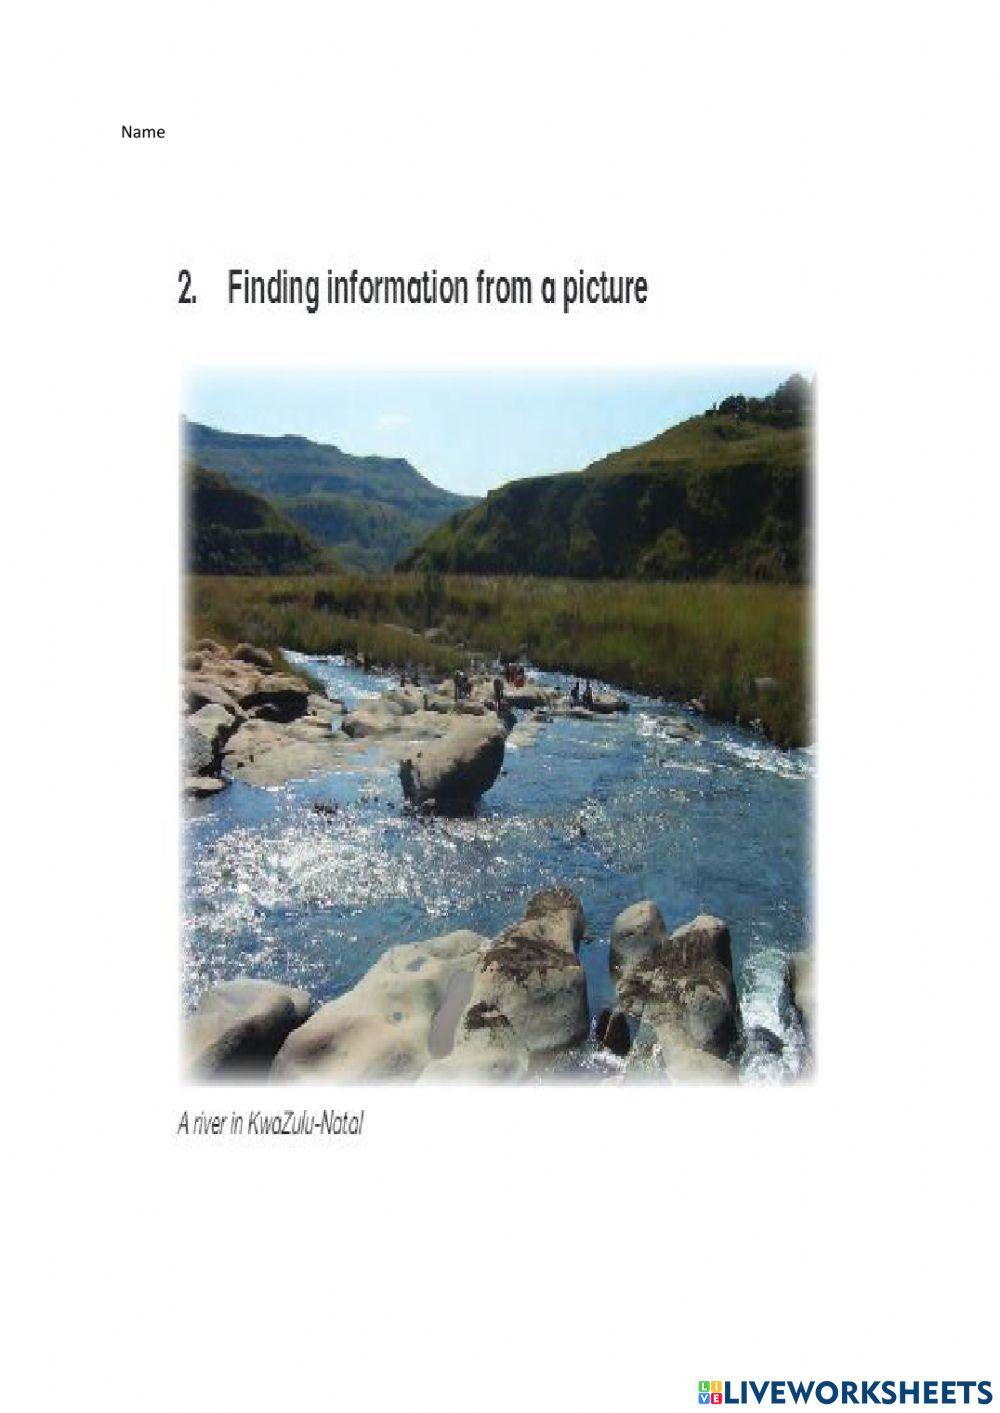 Finding information on a photo